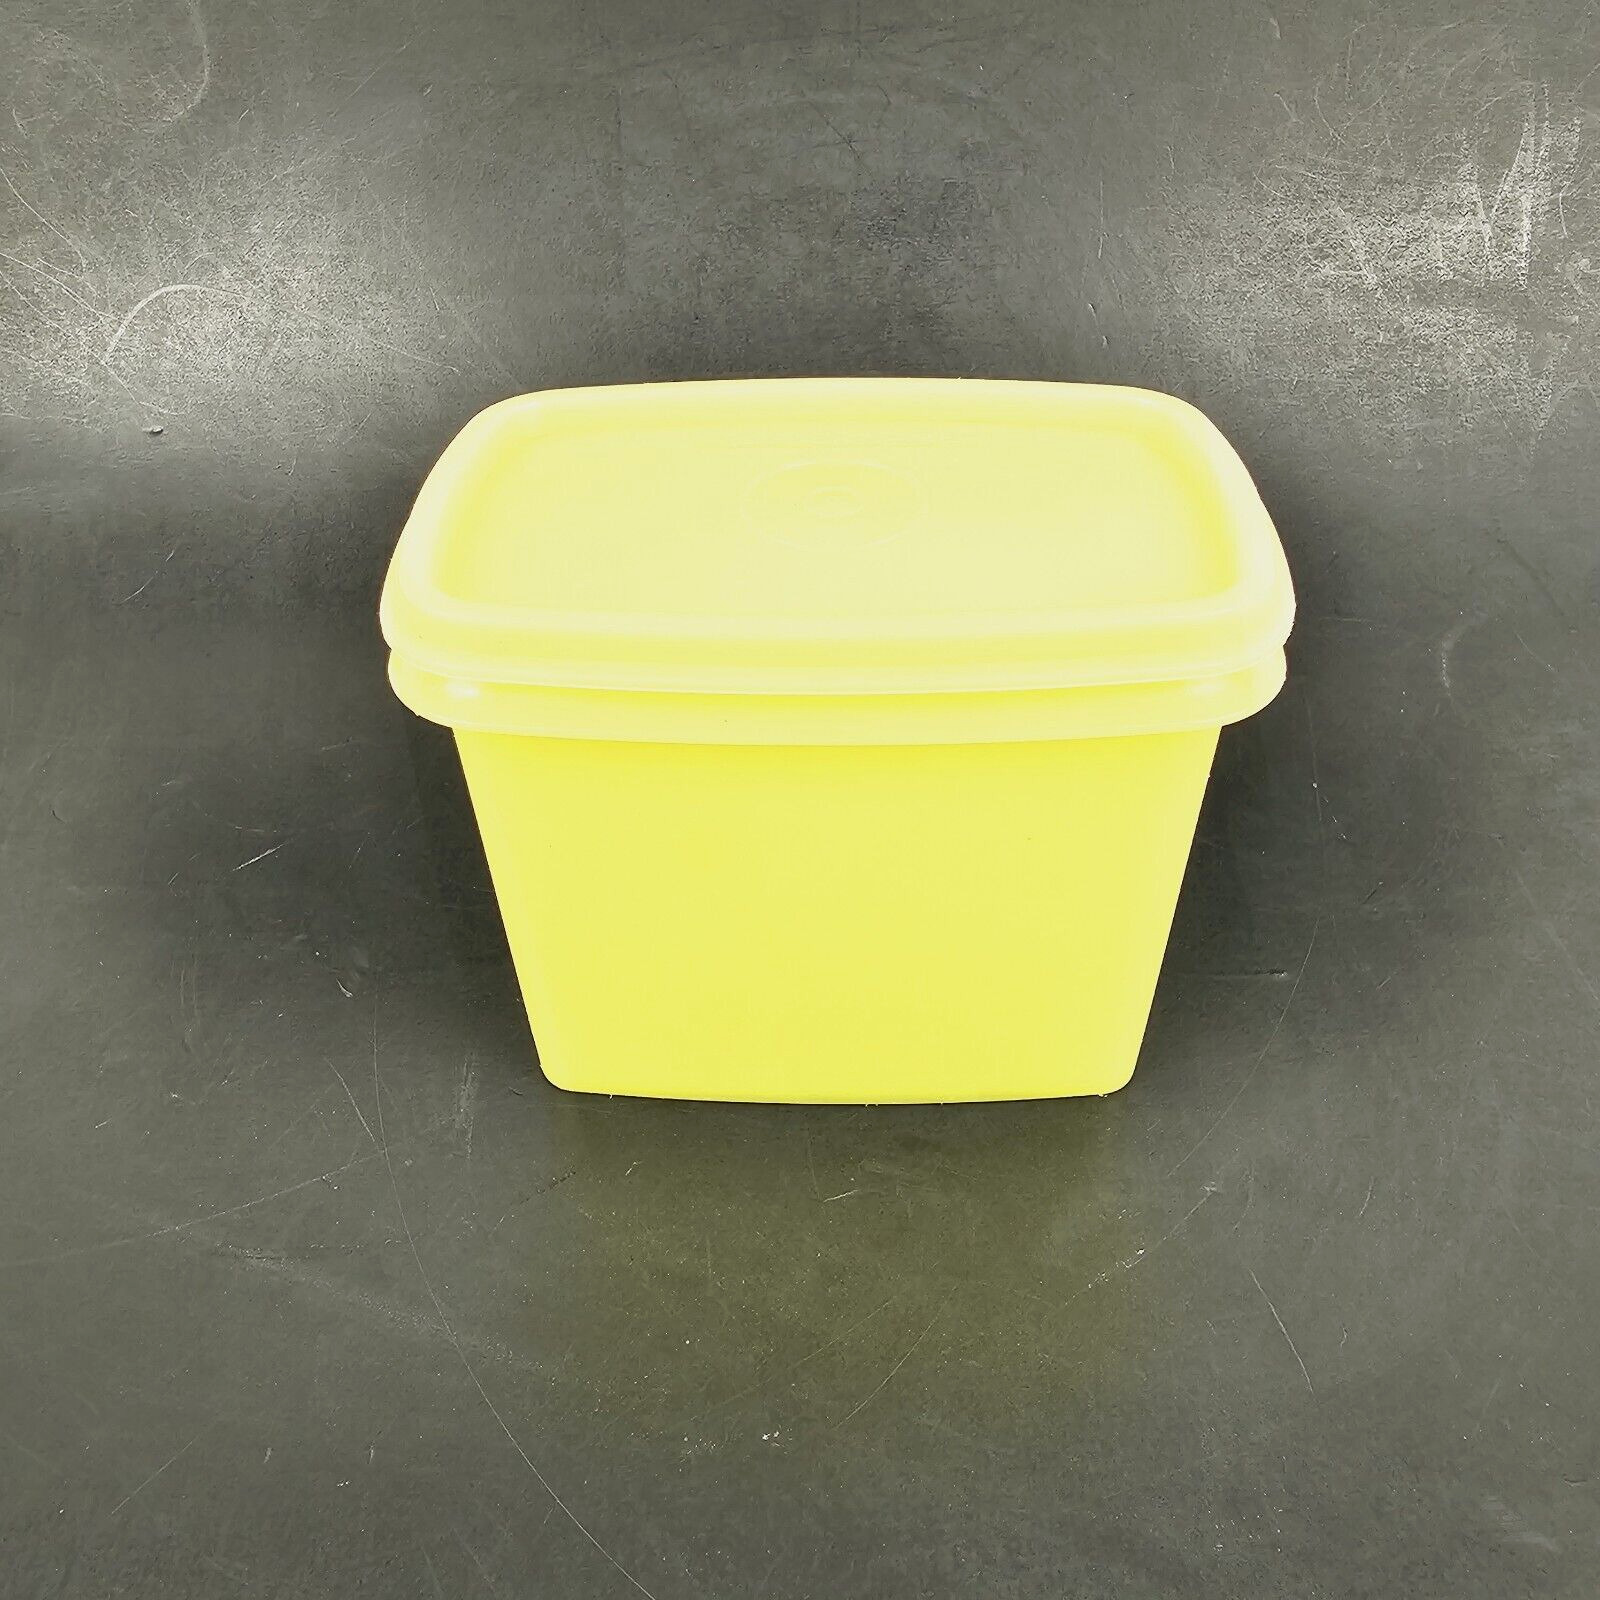 VINTAGE TUPPERWARE RECTANGLE SMALL SHELF 1243-5 YELLOW STORAGE CONTAINER W/ LID